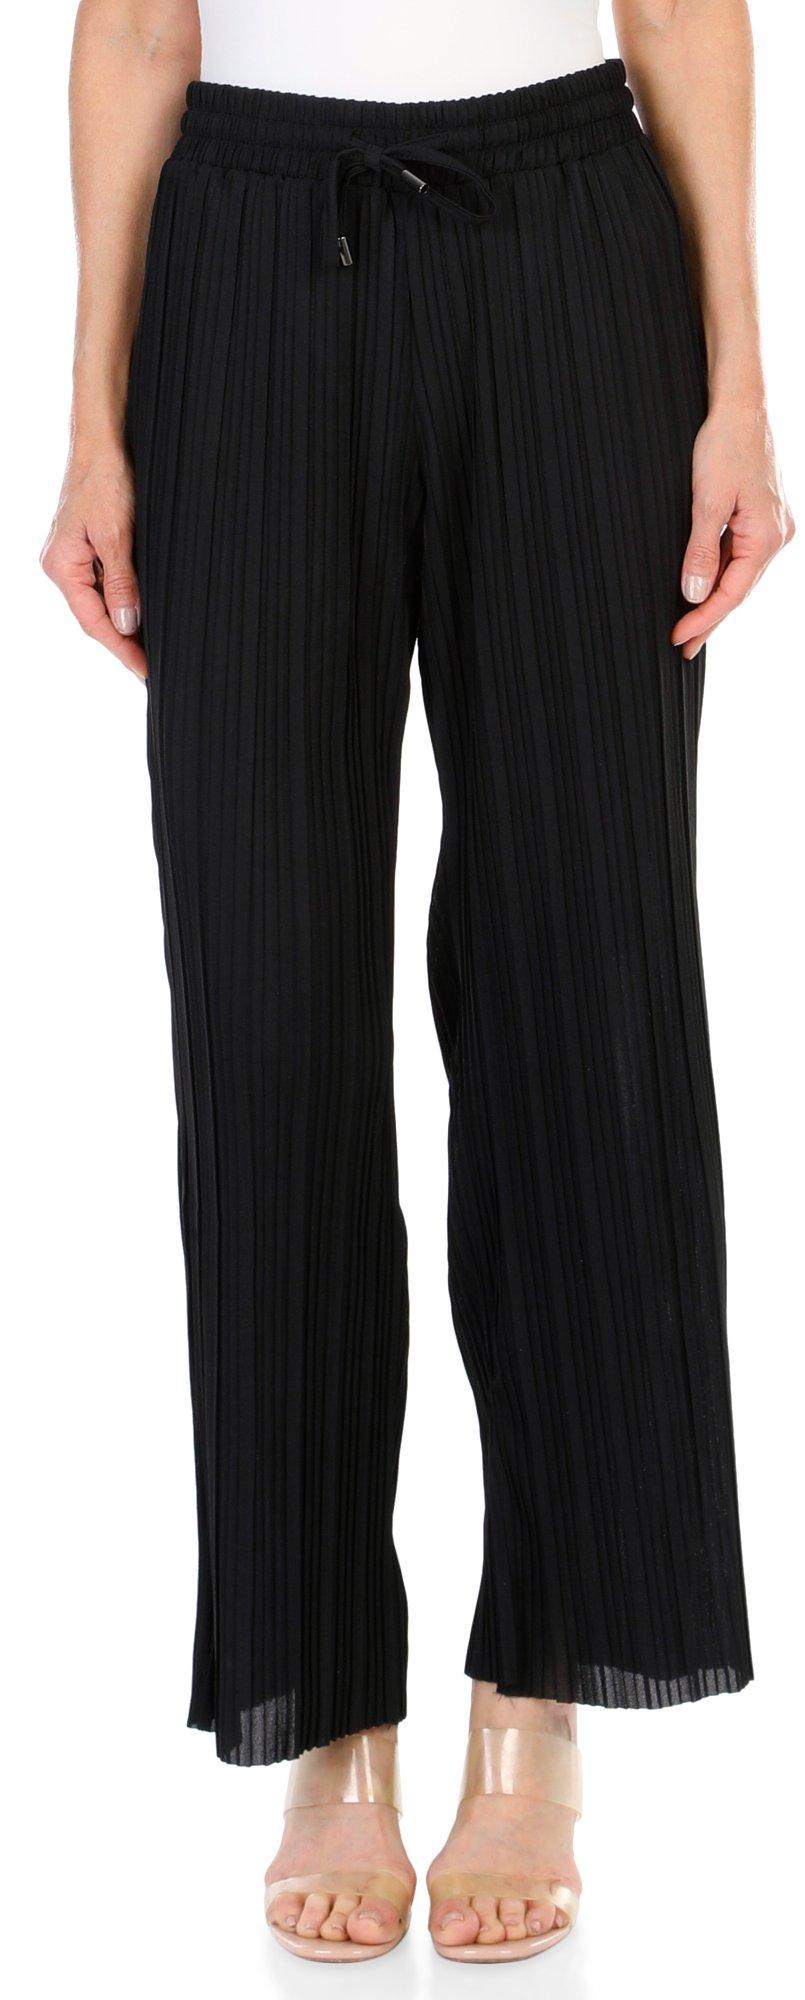 Women's Solid Pleated Pull On Pants